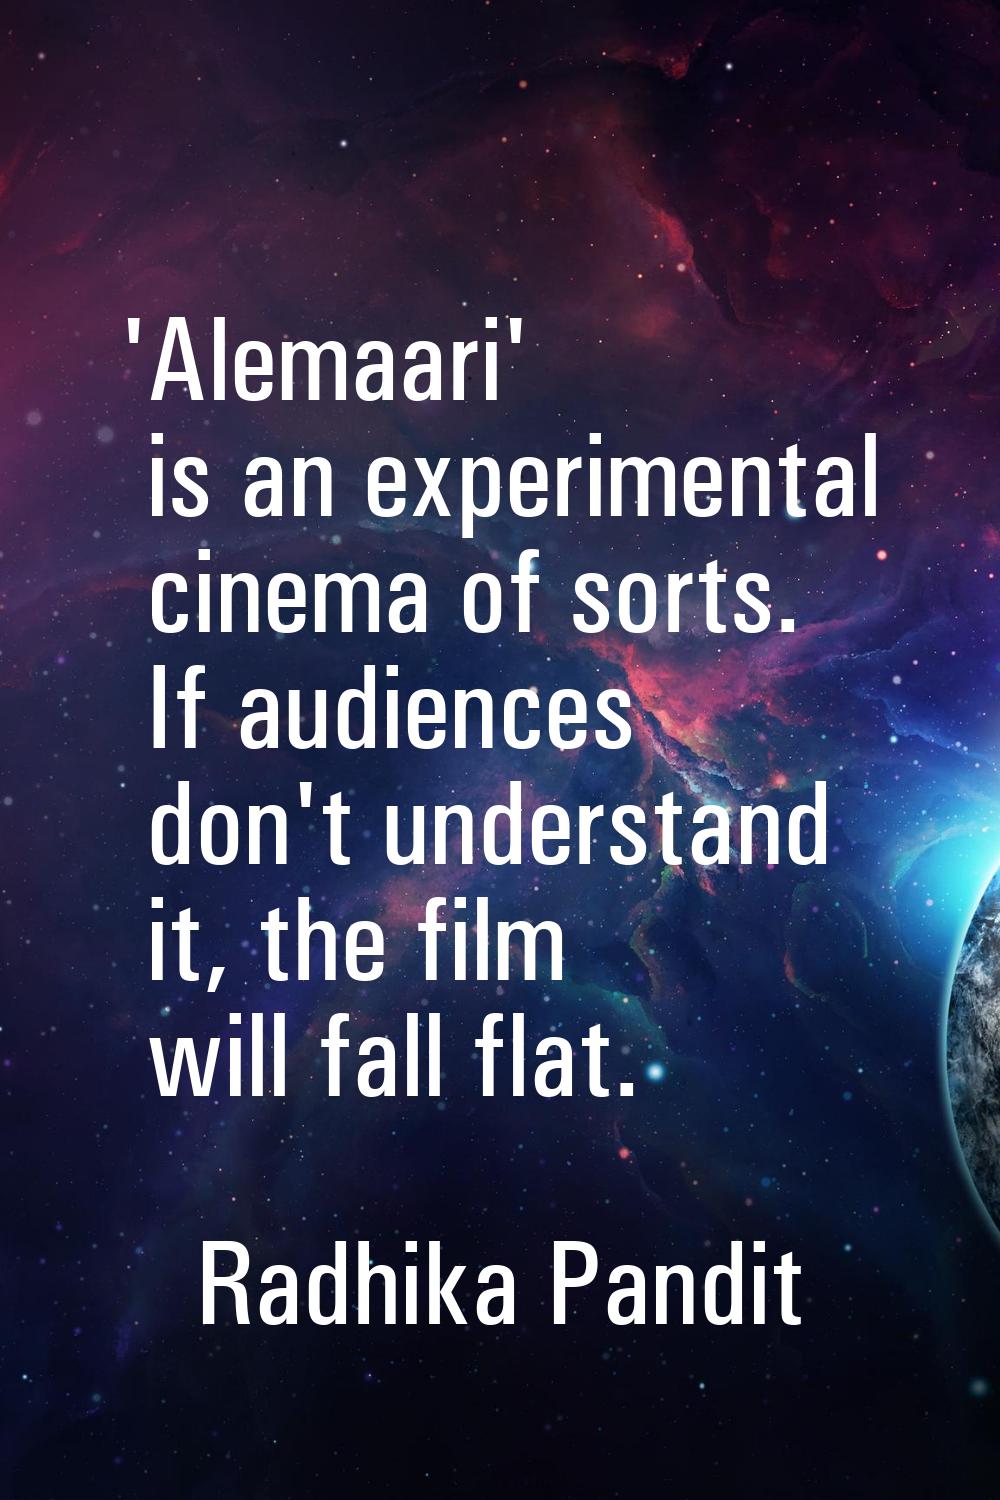 'Alemaari' is an experimental cinema of sorts. If audiences don't understand it, the film will fall